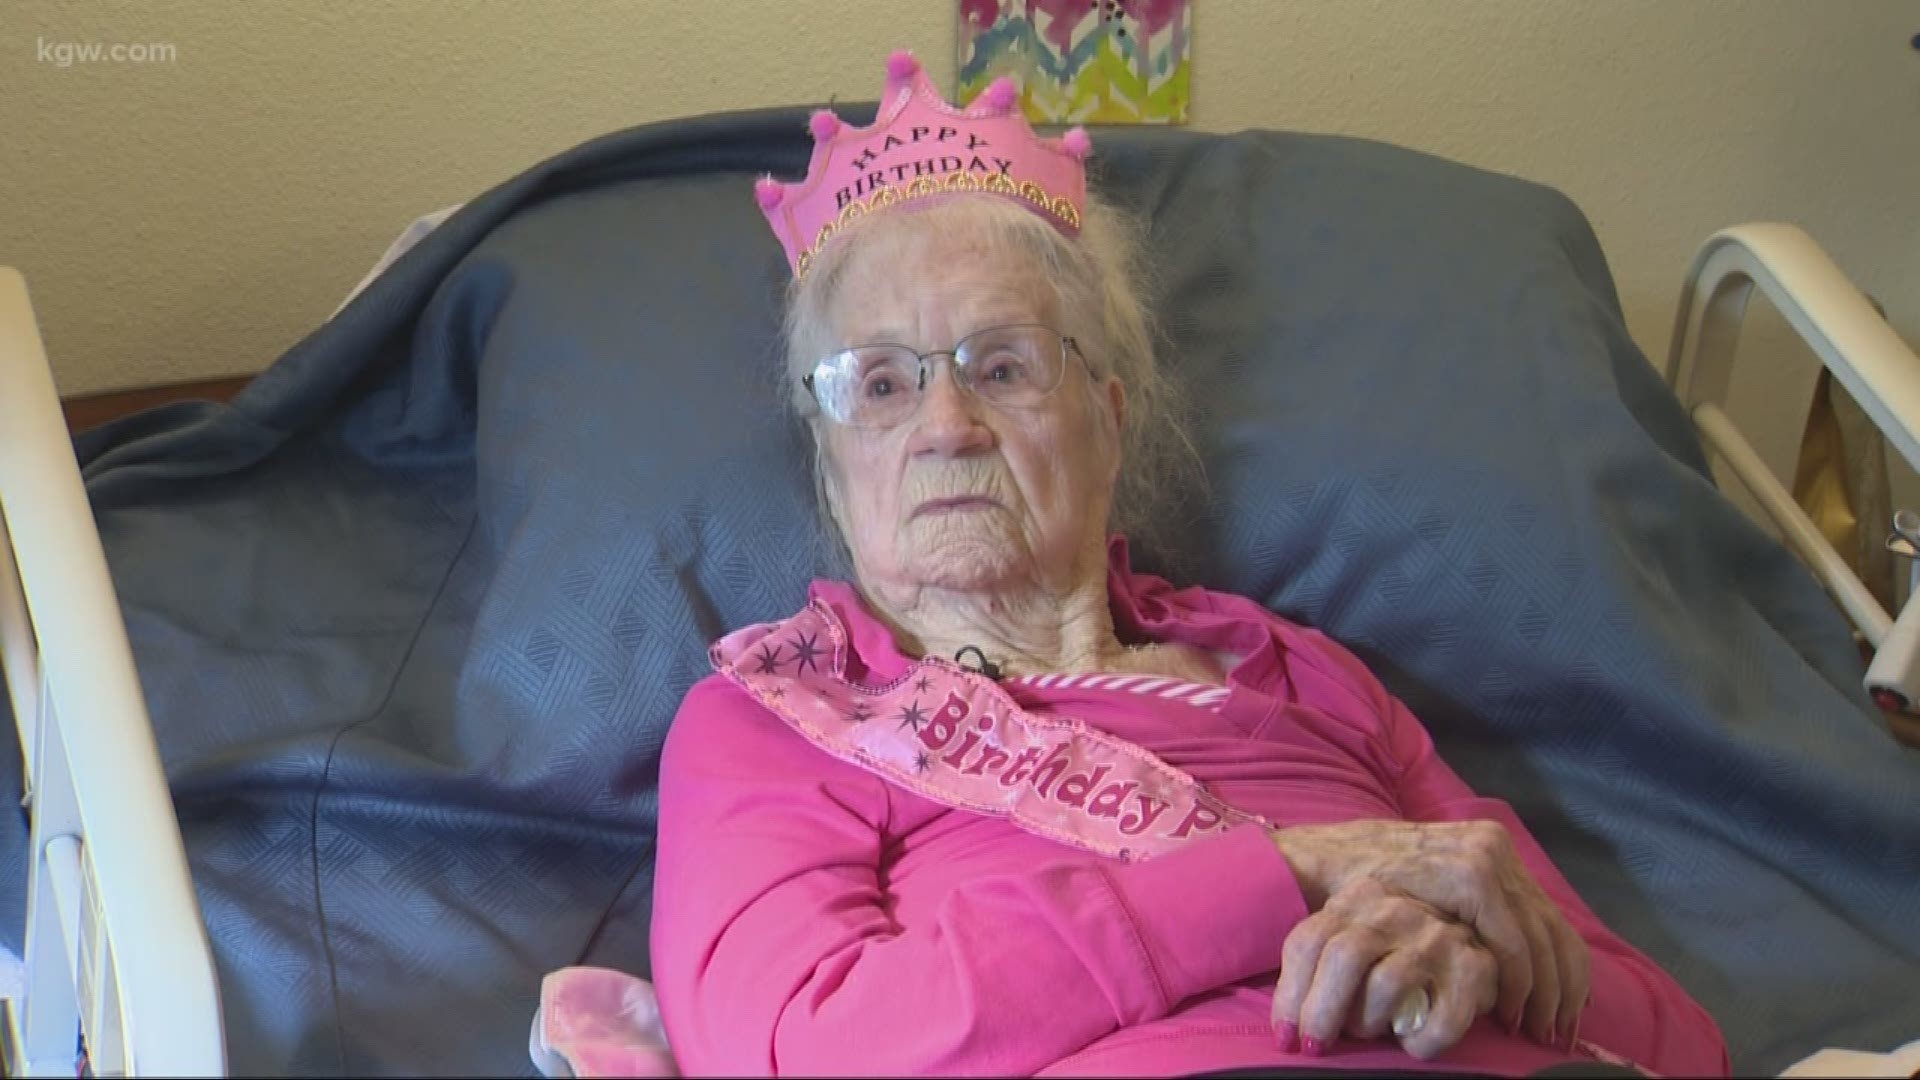 Wish come true: 'Cute' Keizer firefighters celebrate woman's 104th birthday